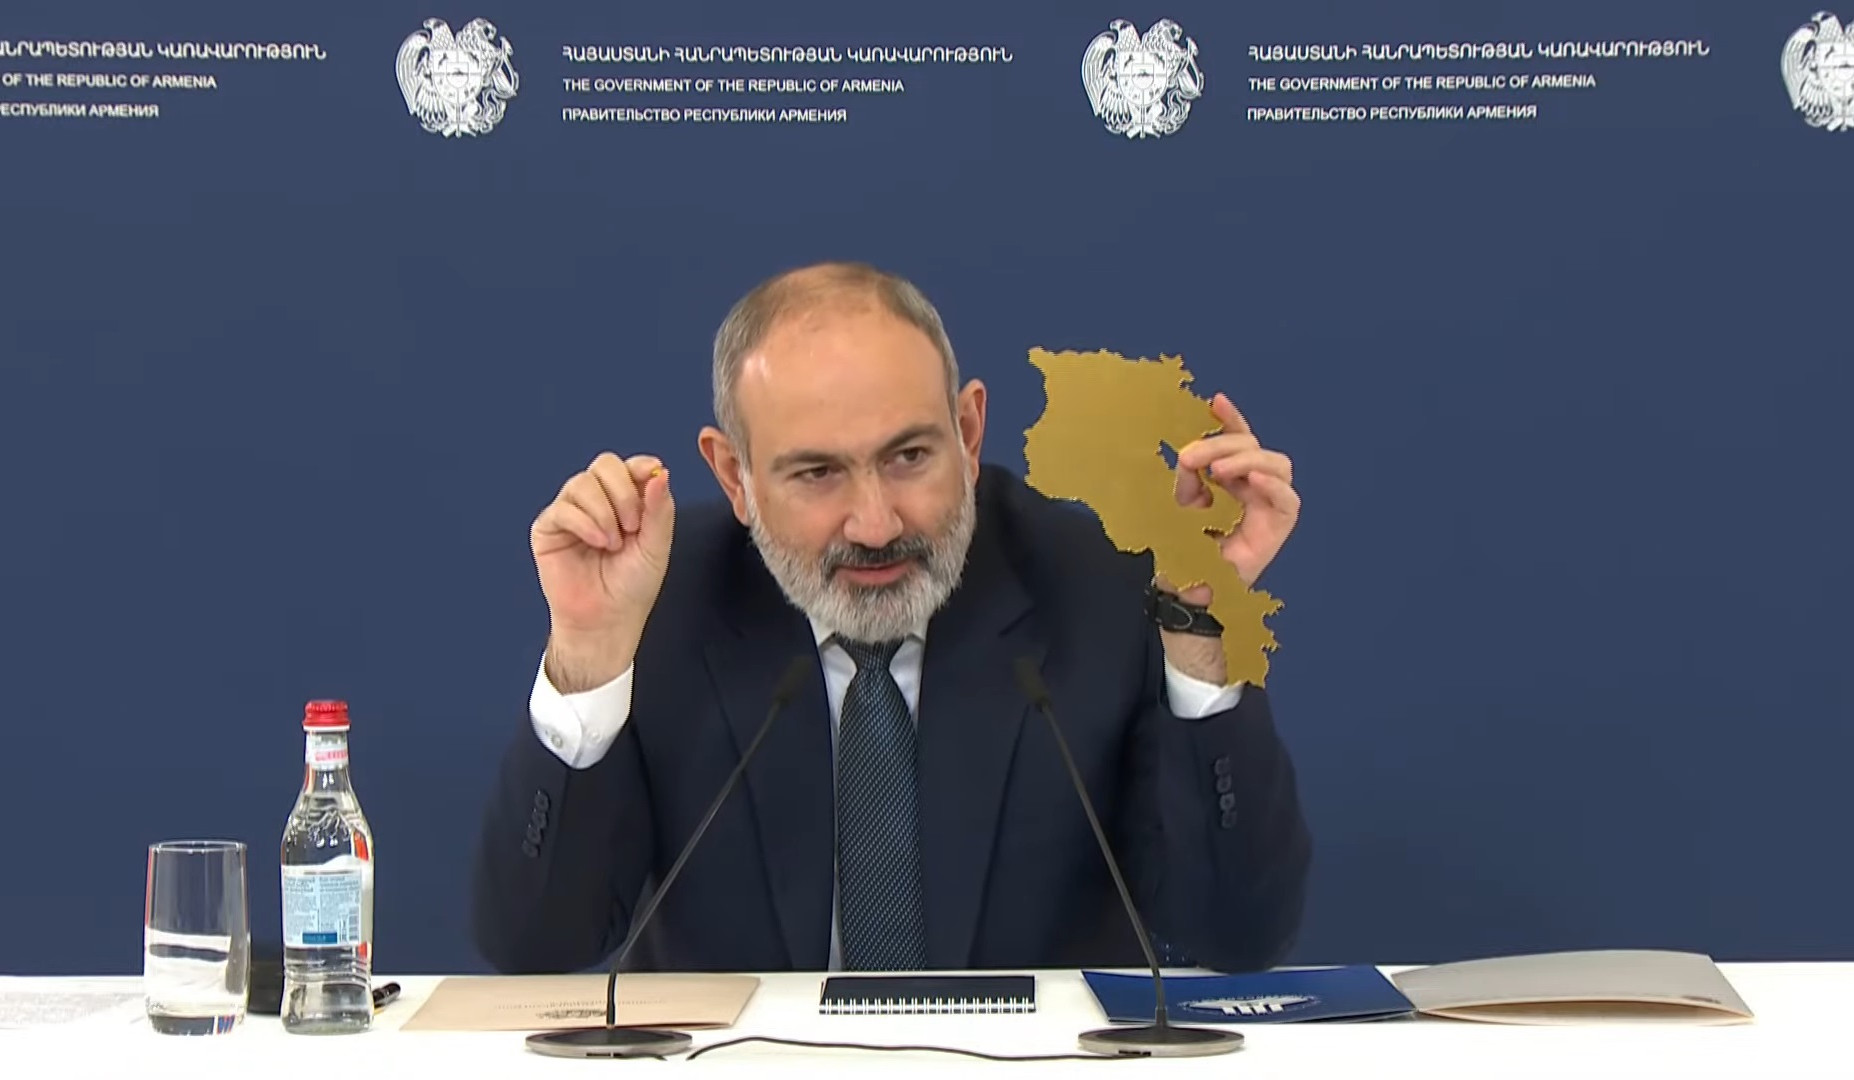 There was never any discussion and there can be no question about handing over any village of Tavush region, Pashinyan